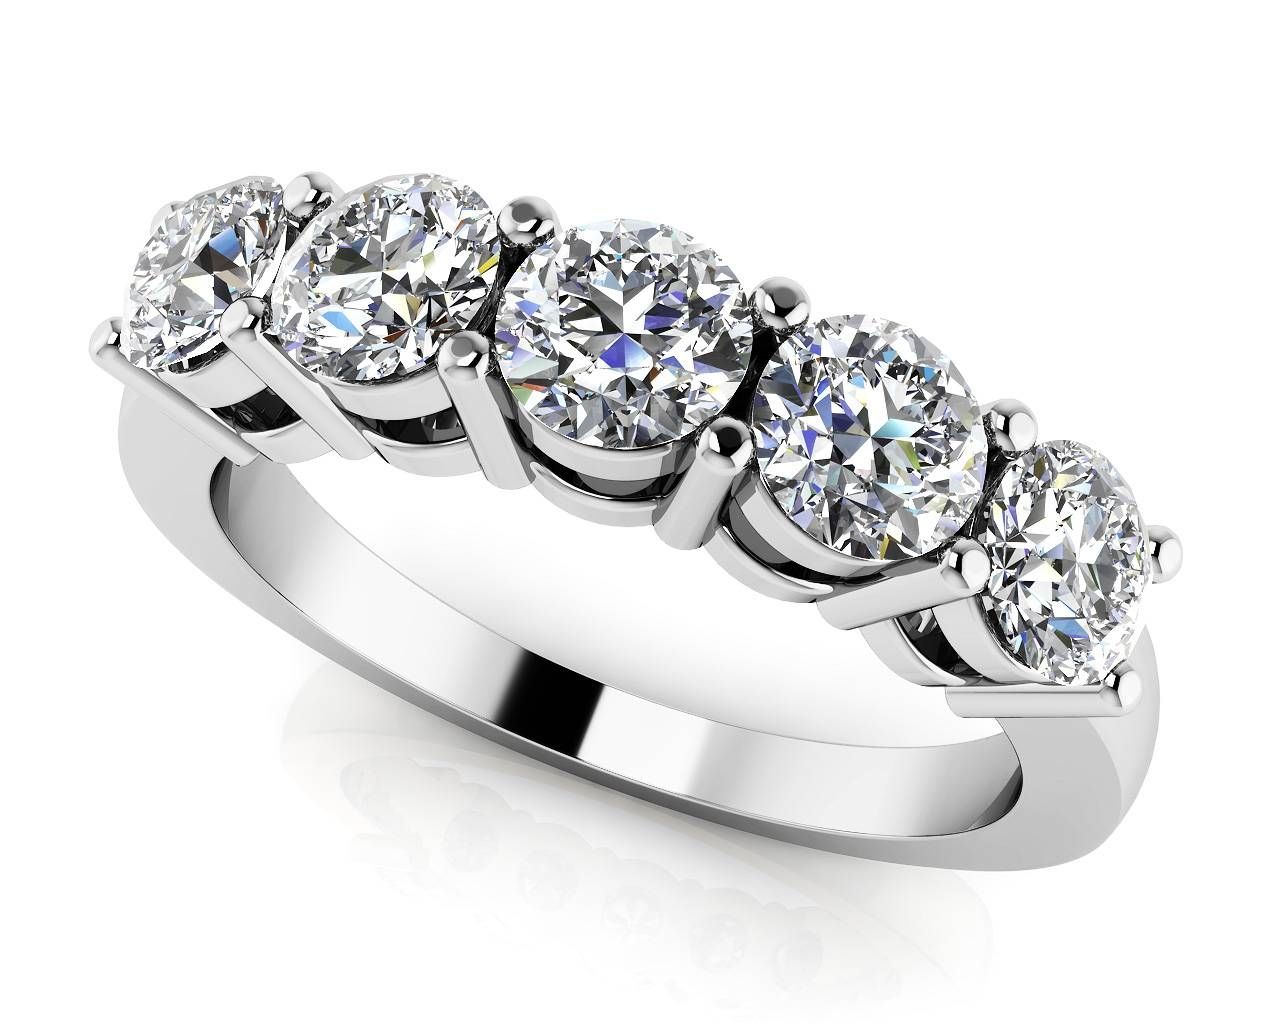 Design Your Own Diamond Anniversary Ring & Eternity Ring Pertaining To Most Current Anniversary Rings For Her (View 9 of 25)